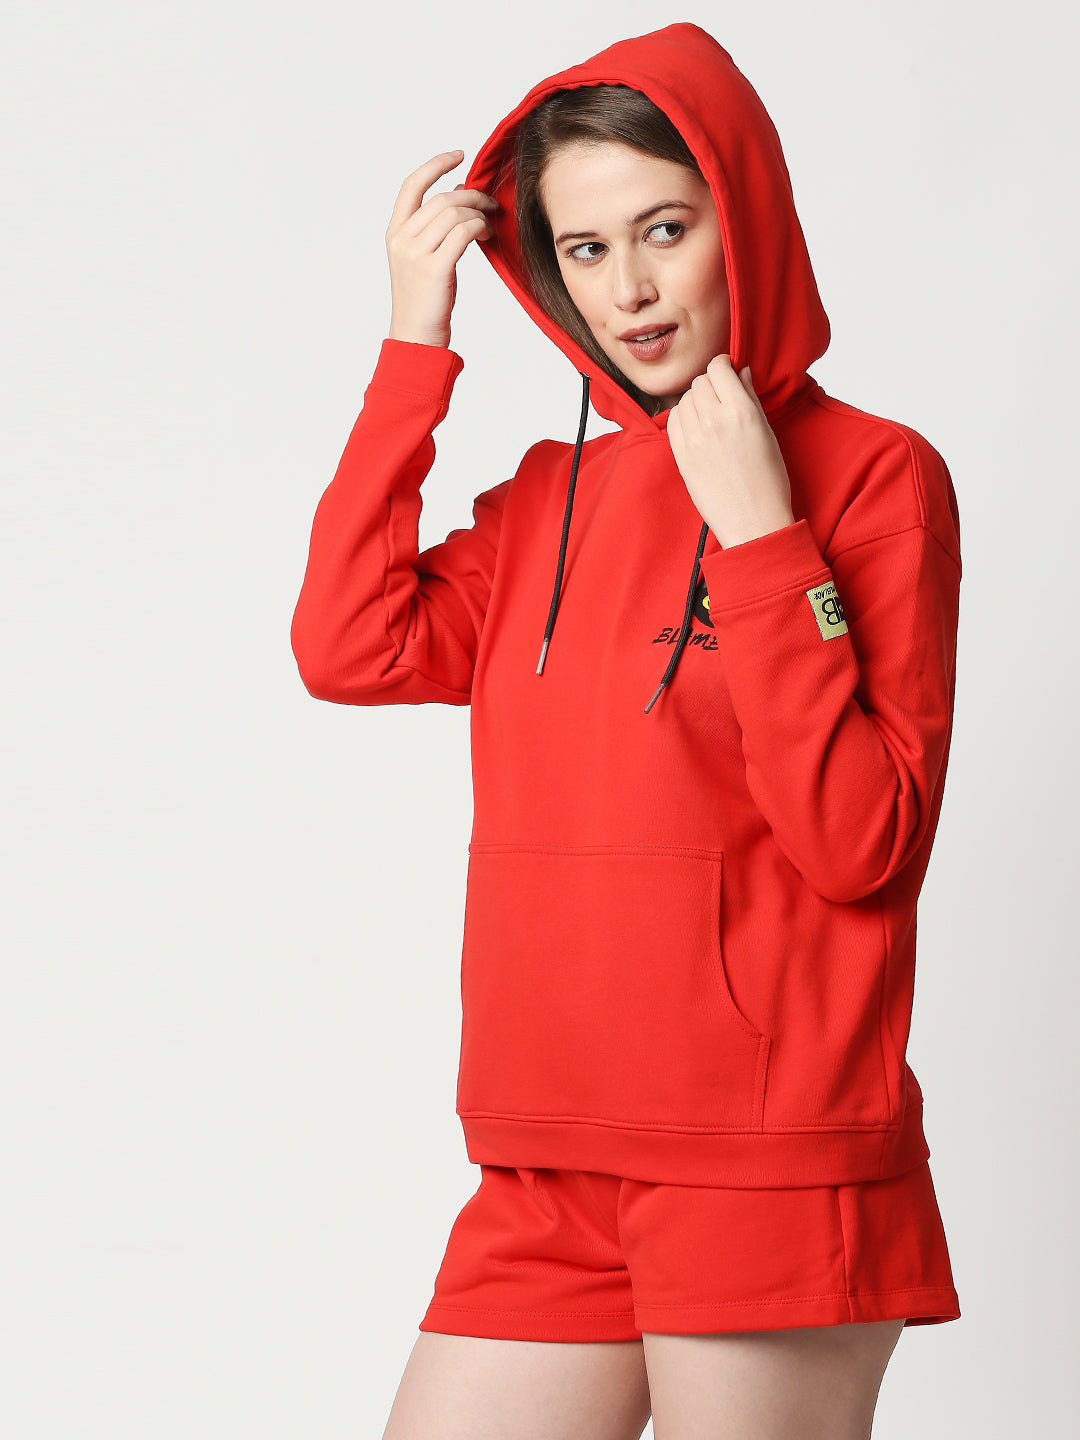 Buy Womens Hoodie and short set Front print Red